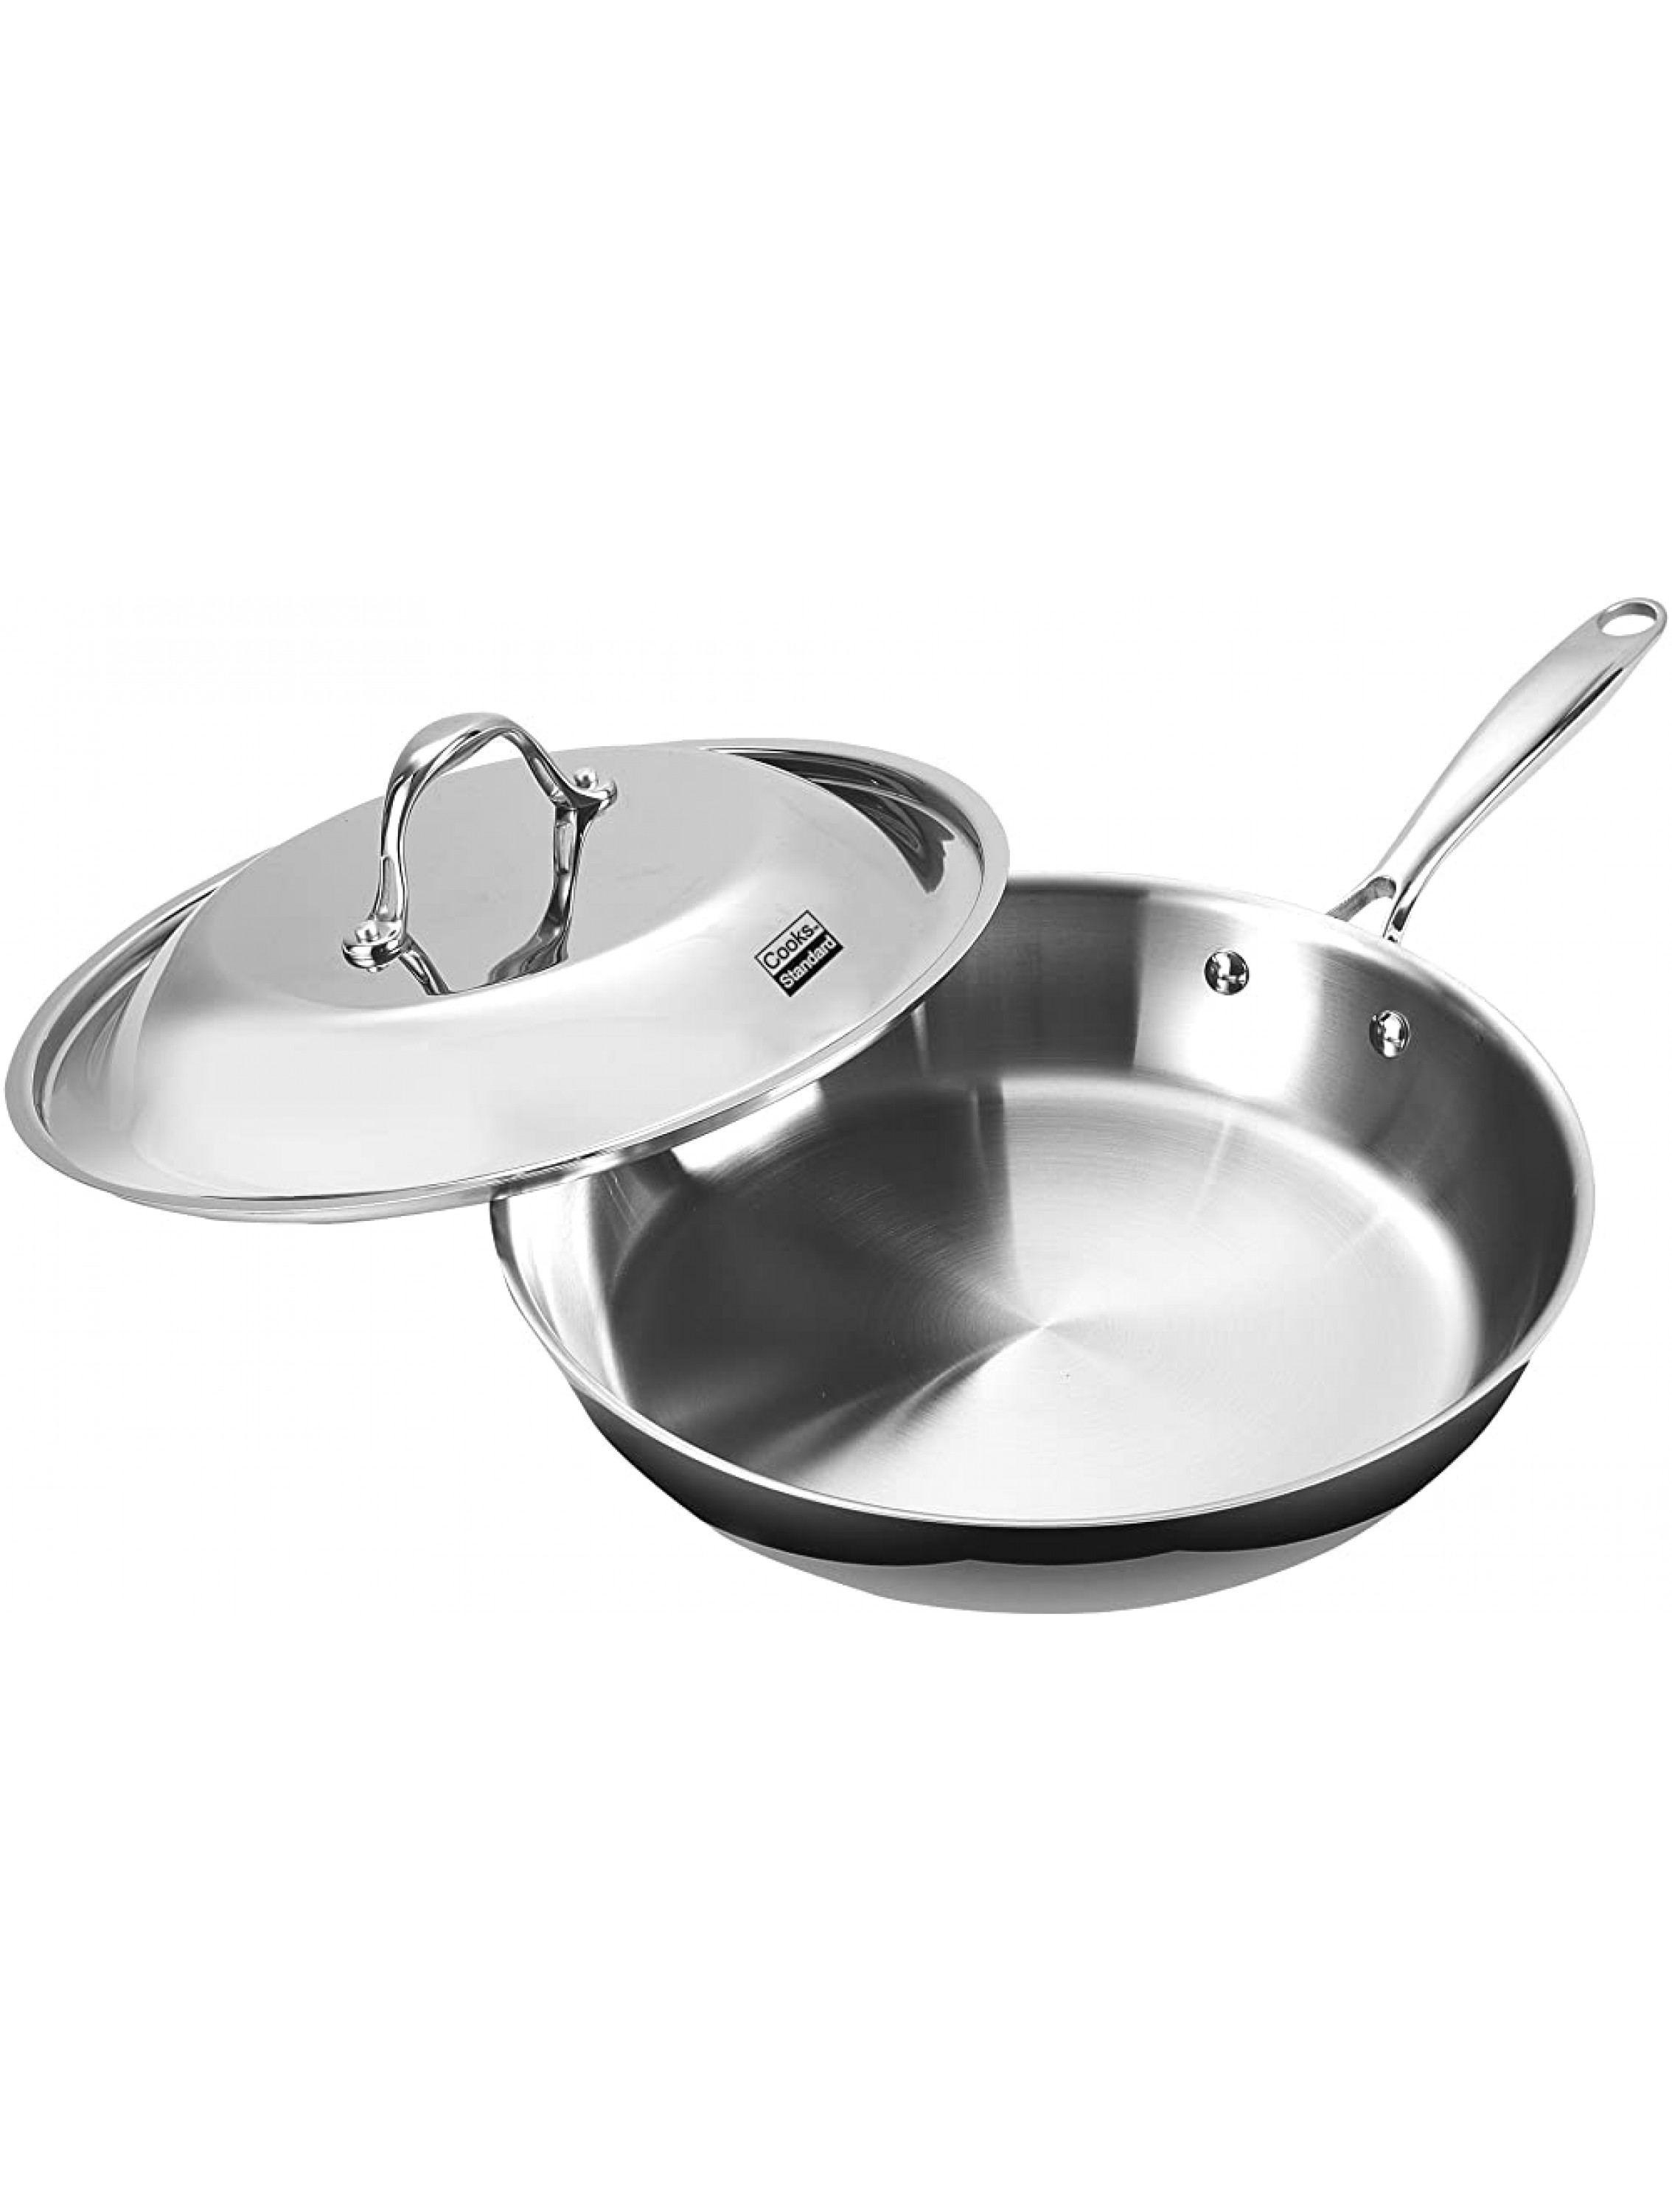 Cooks Standard Multi-Ply Clad Stainless Steel Frying pan 12 with high dome lid Silver - BEP6QYN11